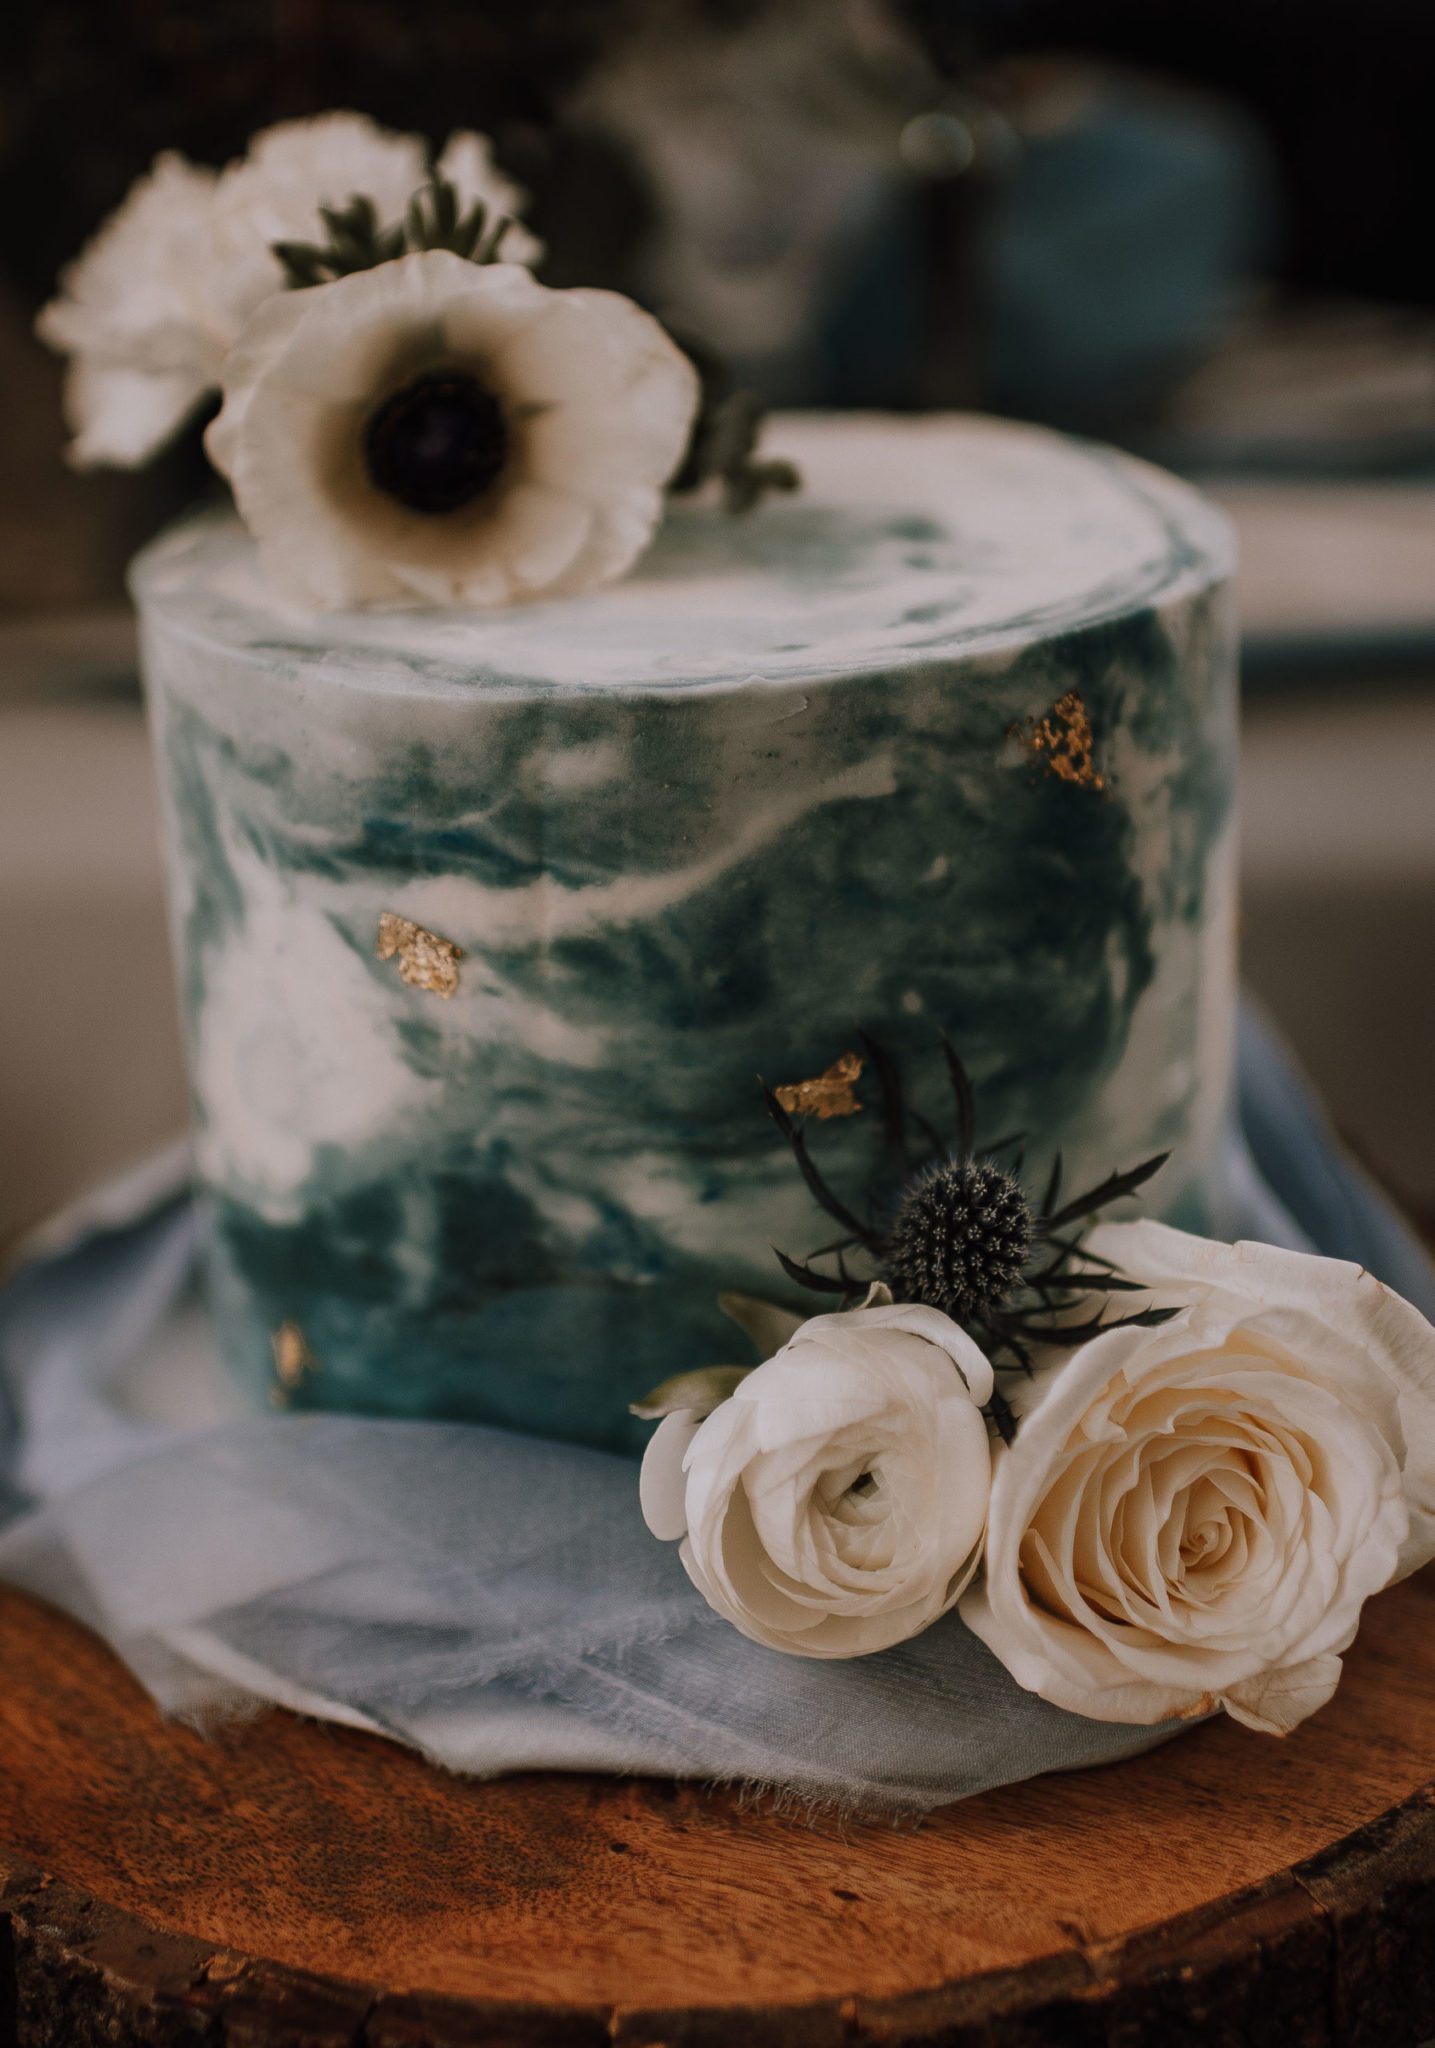 Blue and white marbled cake with gold foil